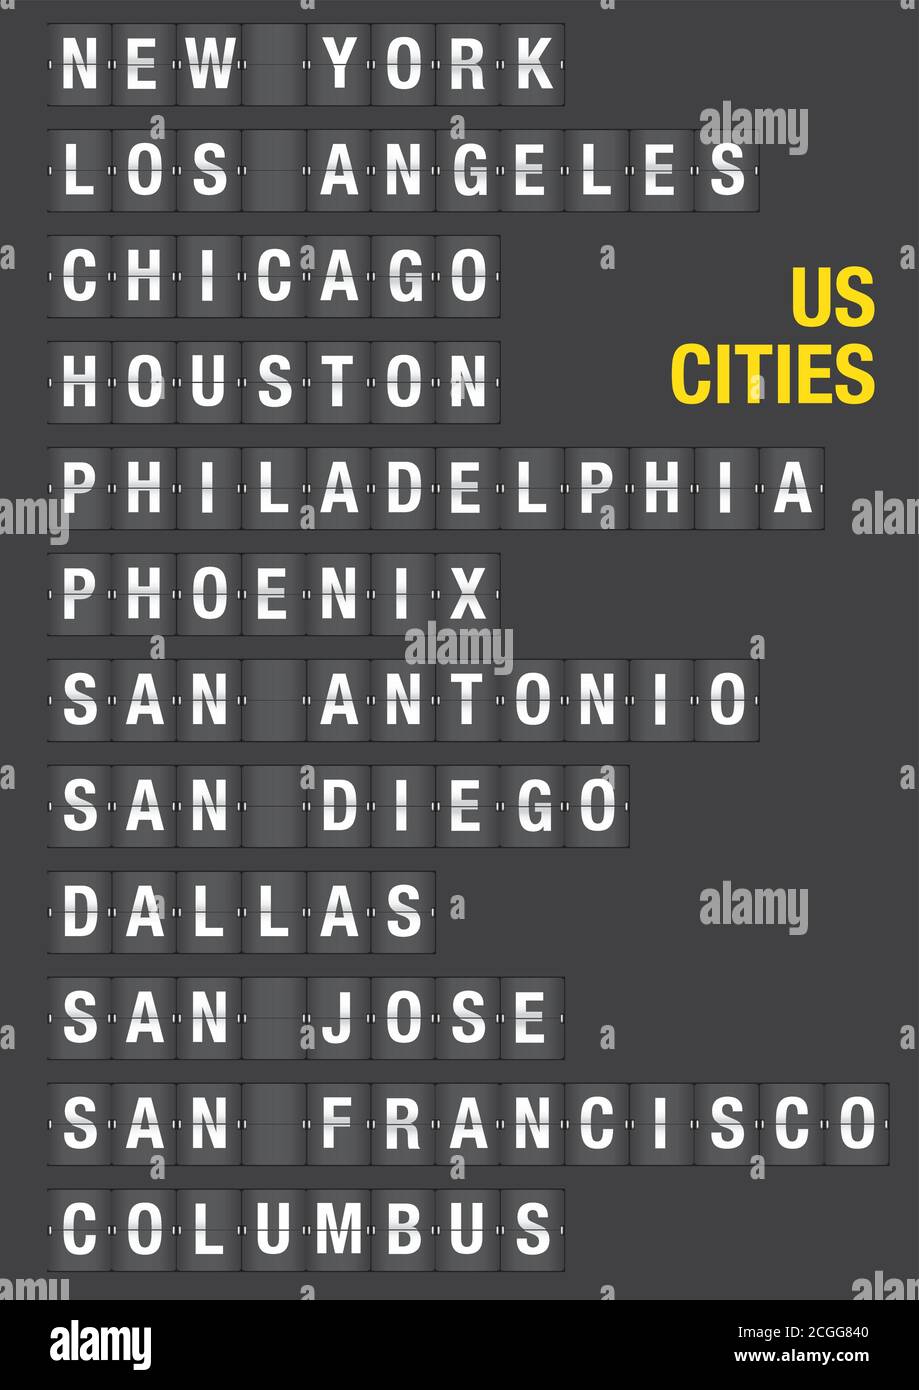 Name of American Cities on airport flip board style. Vector font design. Stock Vector